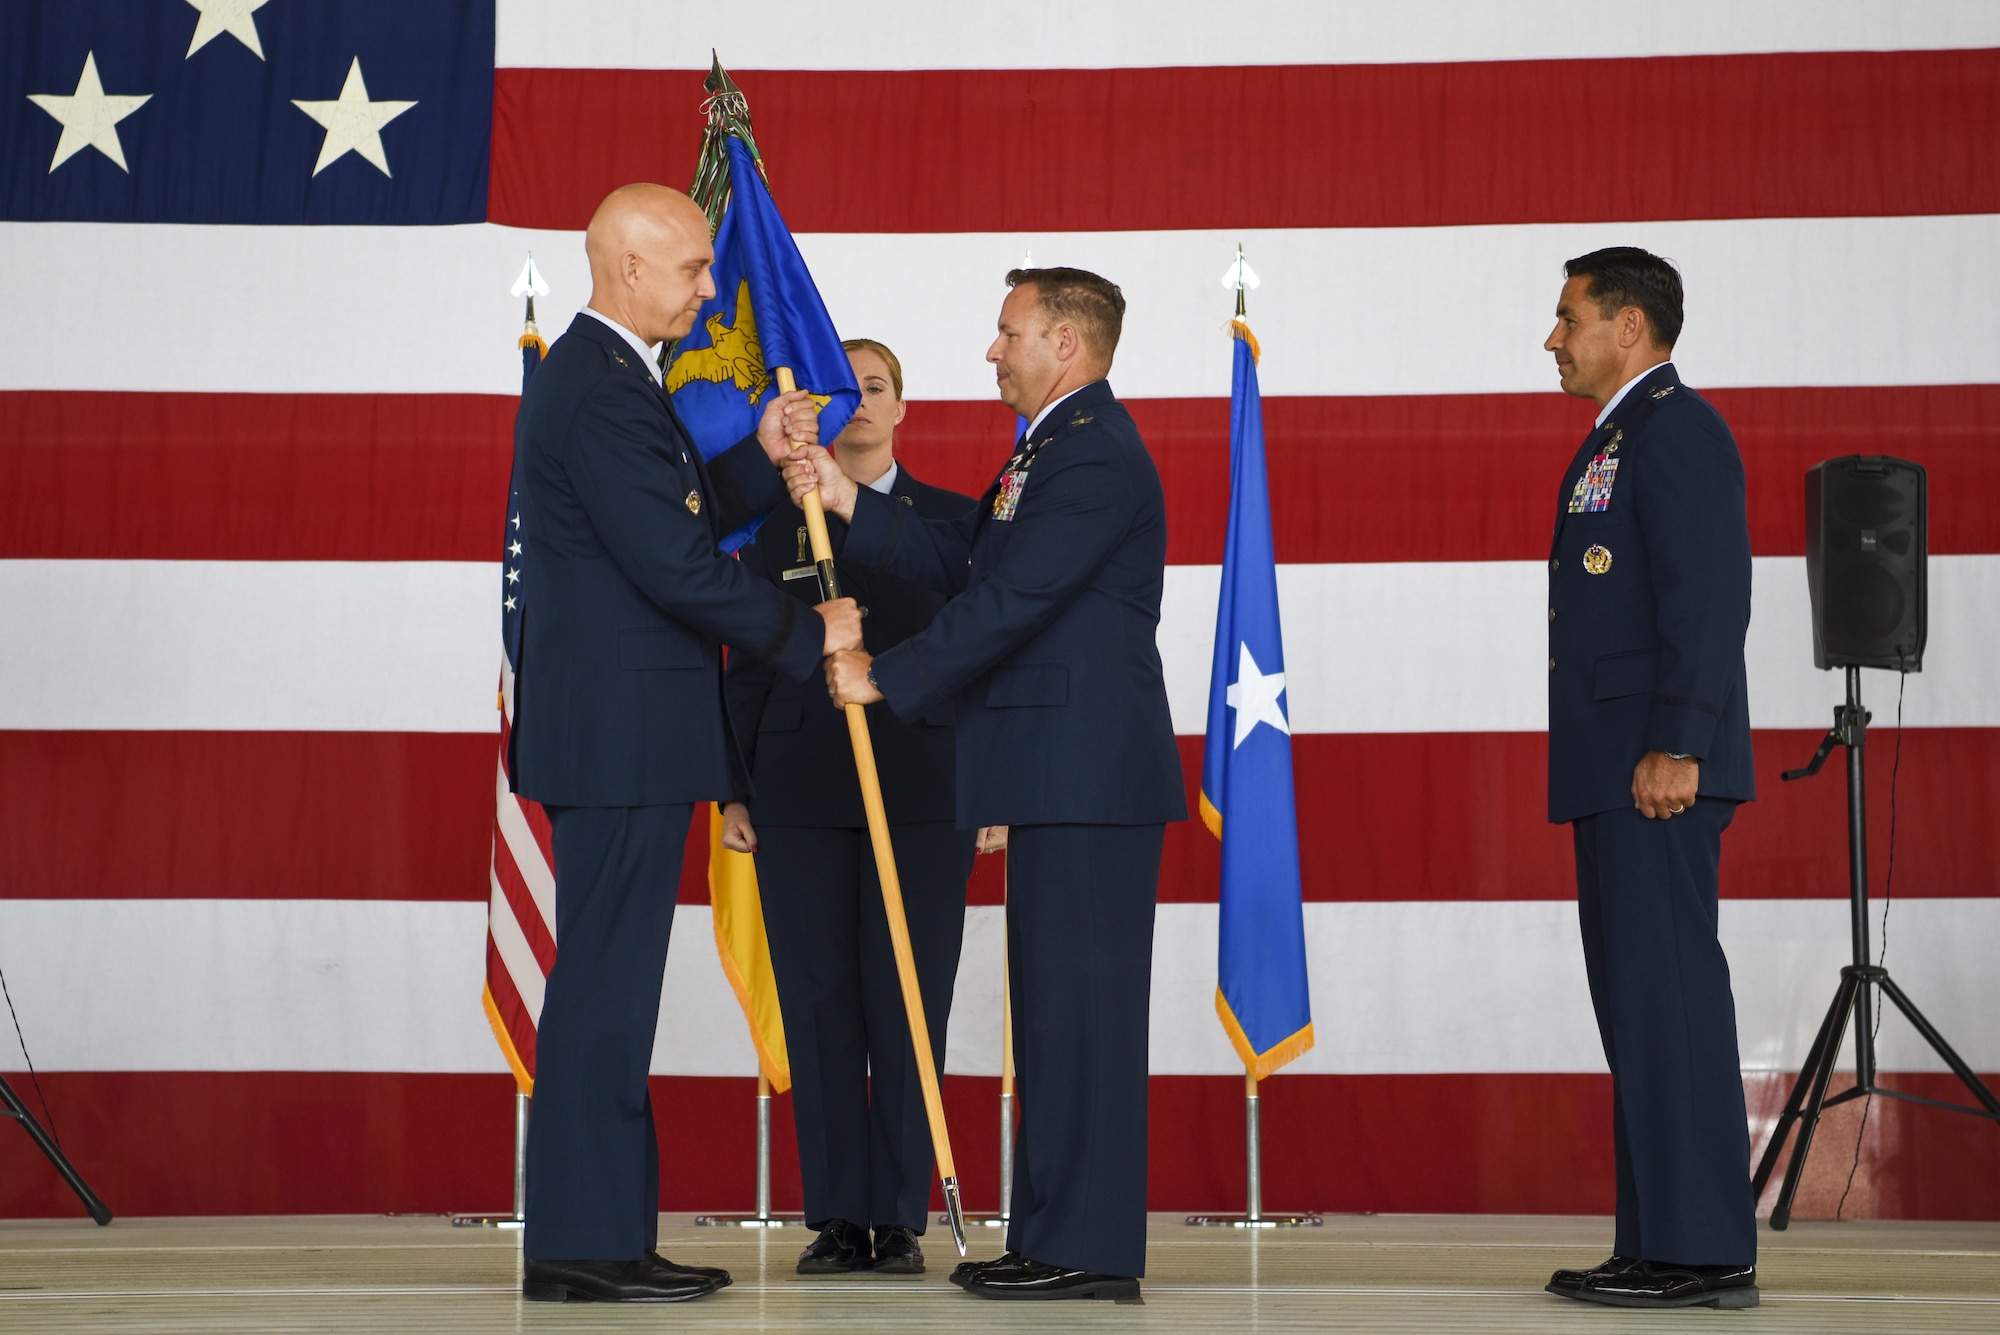 U.S. Air Force Col. Anthony M. Nance, 86th Maintenance Group outgoing commander, right, relinquishes command of the 86 MXG to Brig. Gen. Josh Olson, 86th Airlift Wing commander, during the 86 MXG change of command ceremony at Ramstein Air Base, Germany, July 13, 2022